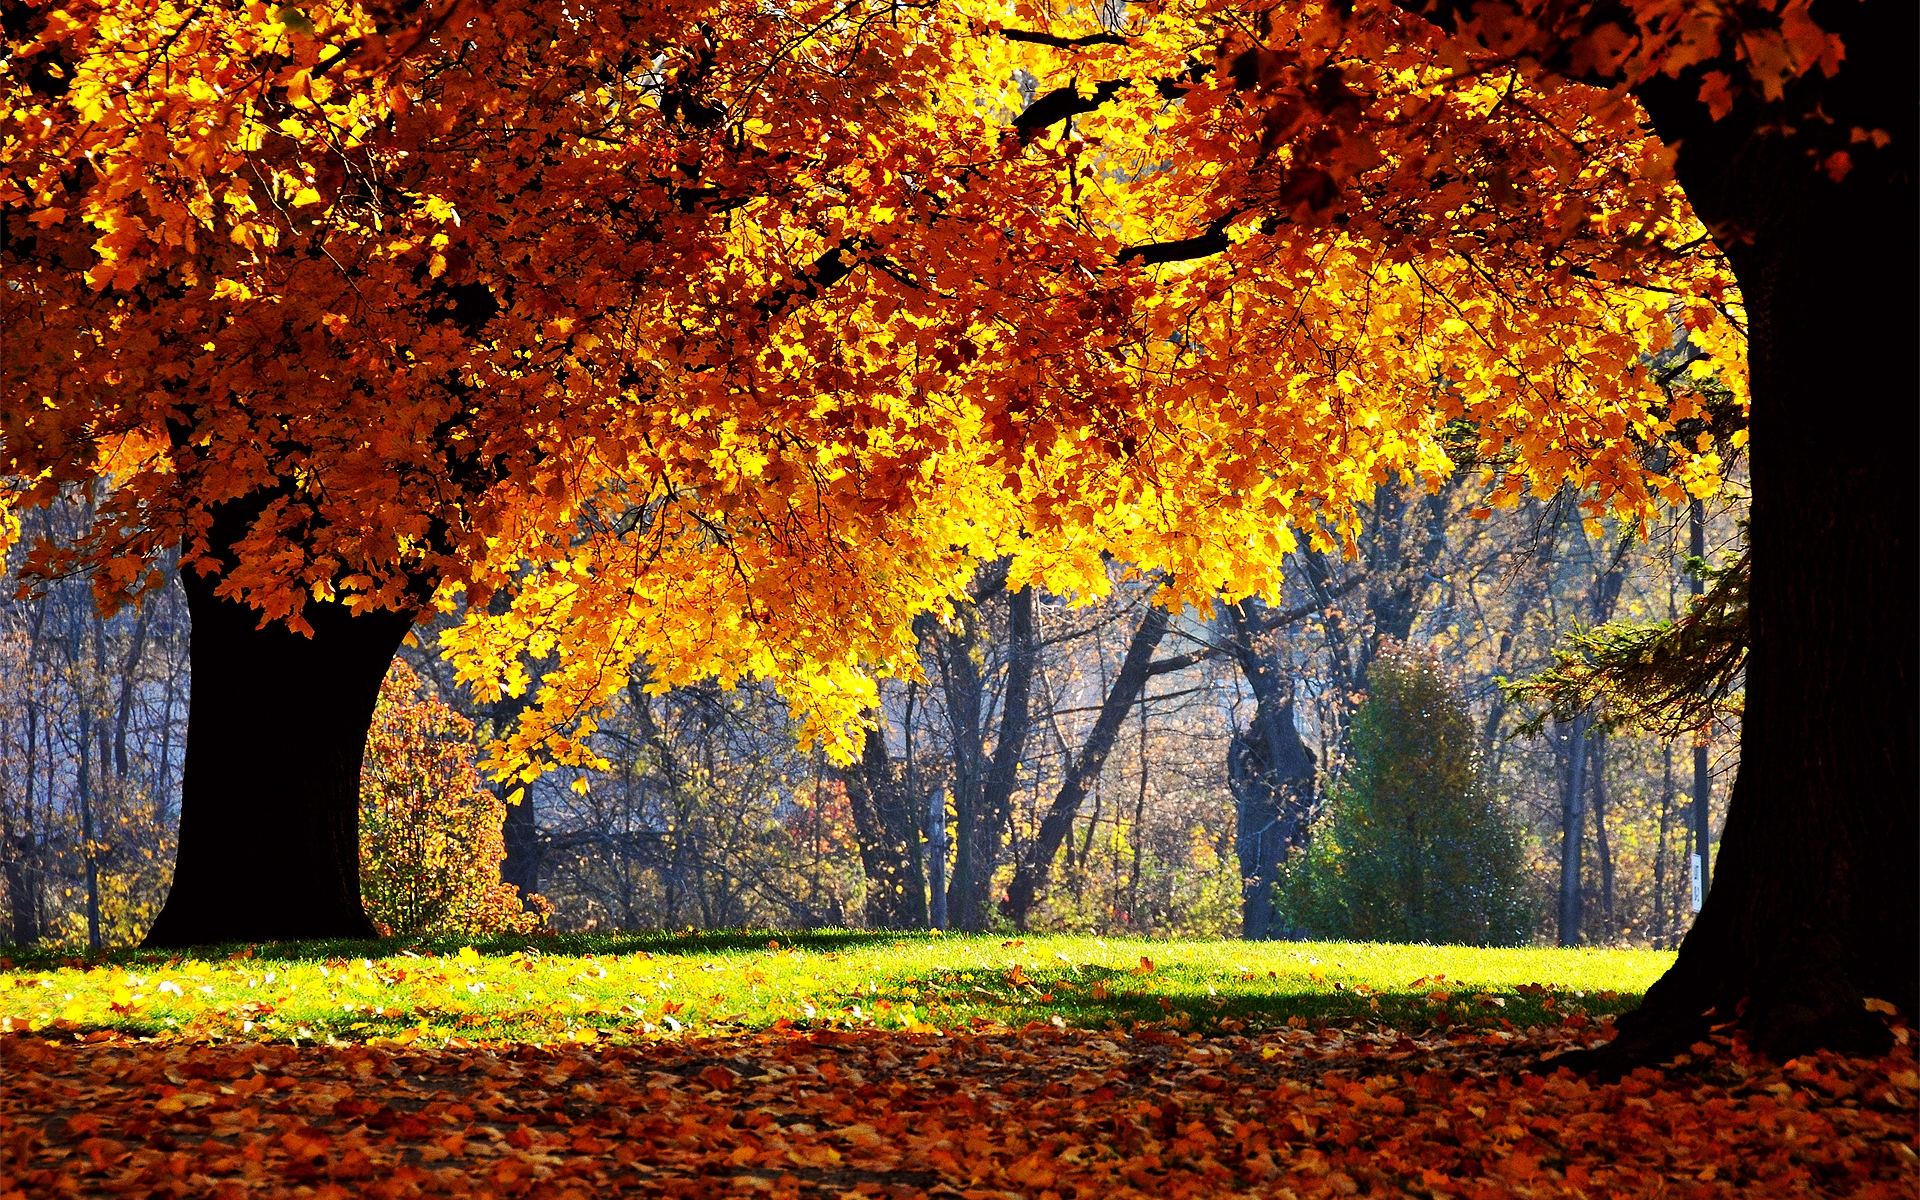 Autumn colors over trees for 1920 x 1200 widescreen resolution